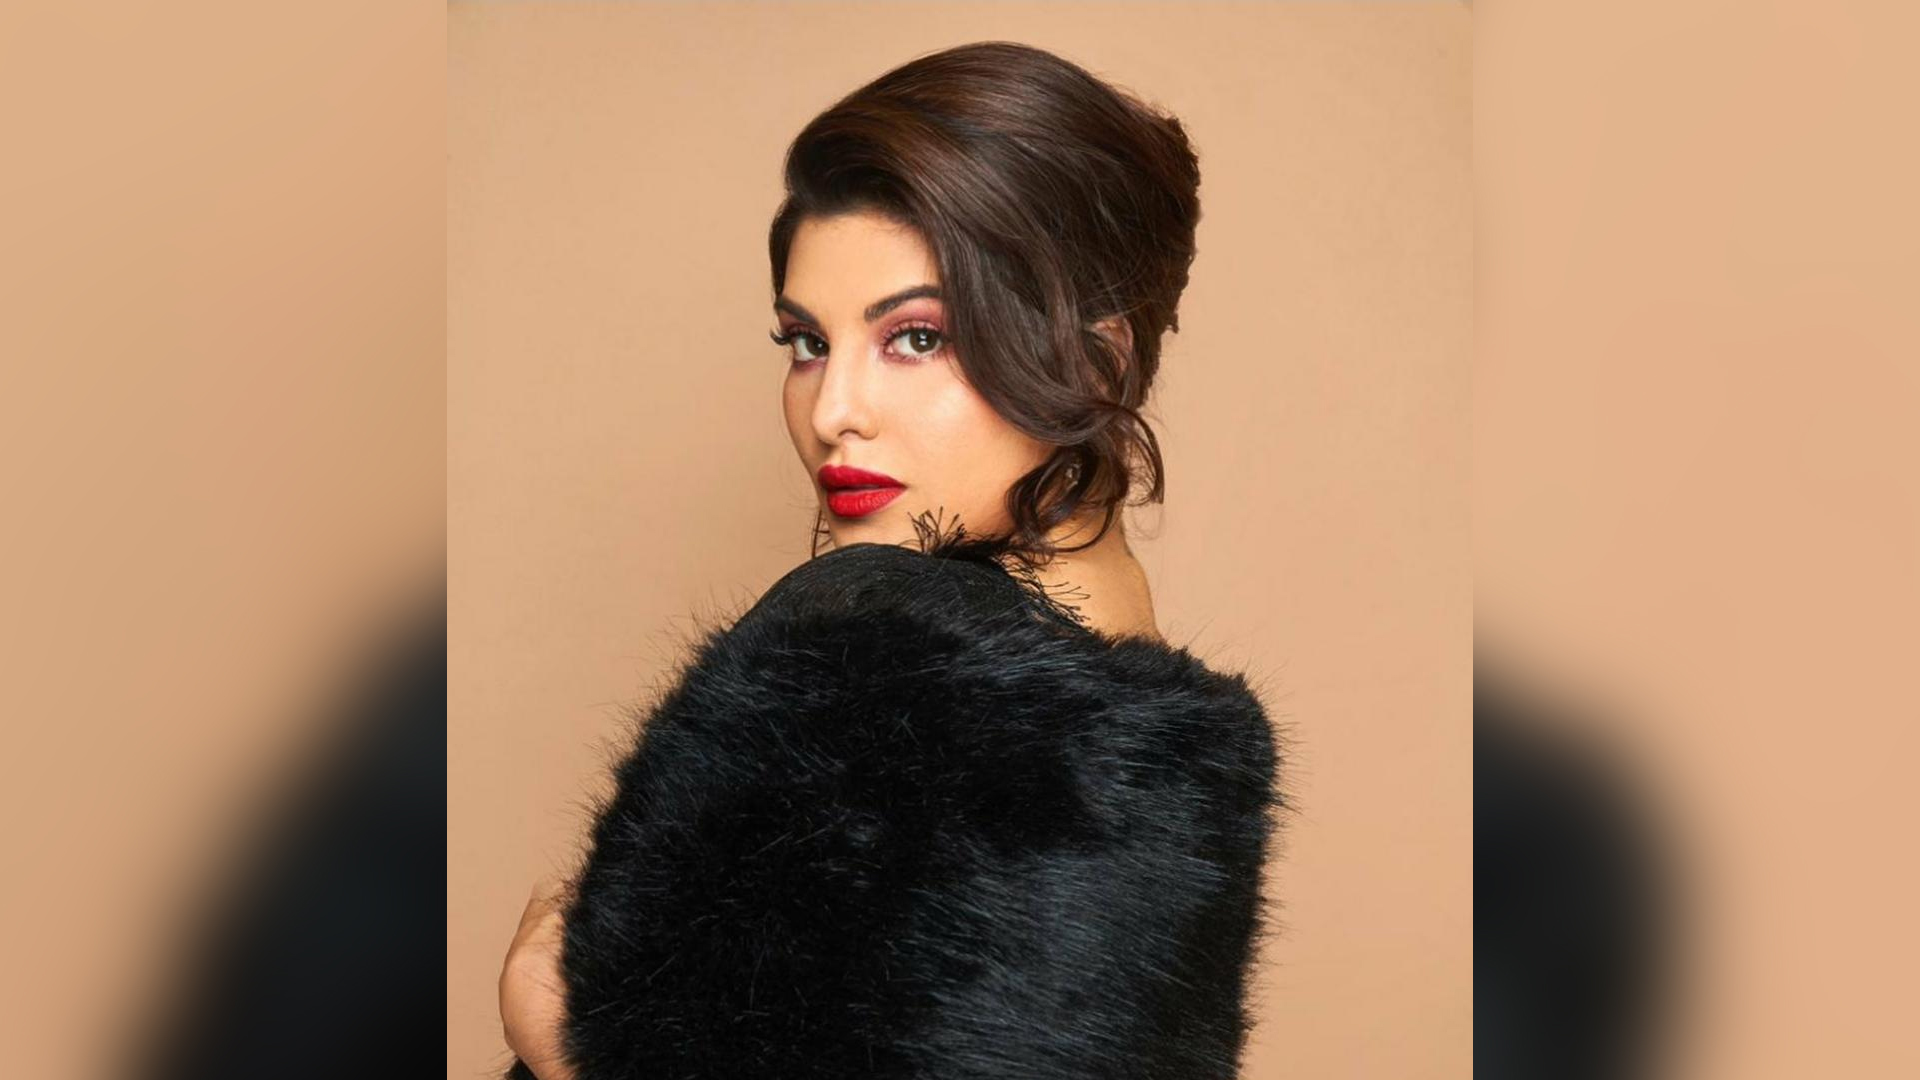 “2020 has been fulfilling professionally”, says Jacqueline Fernandez